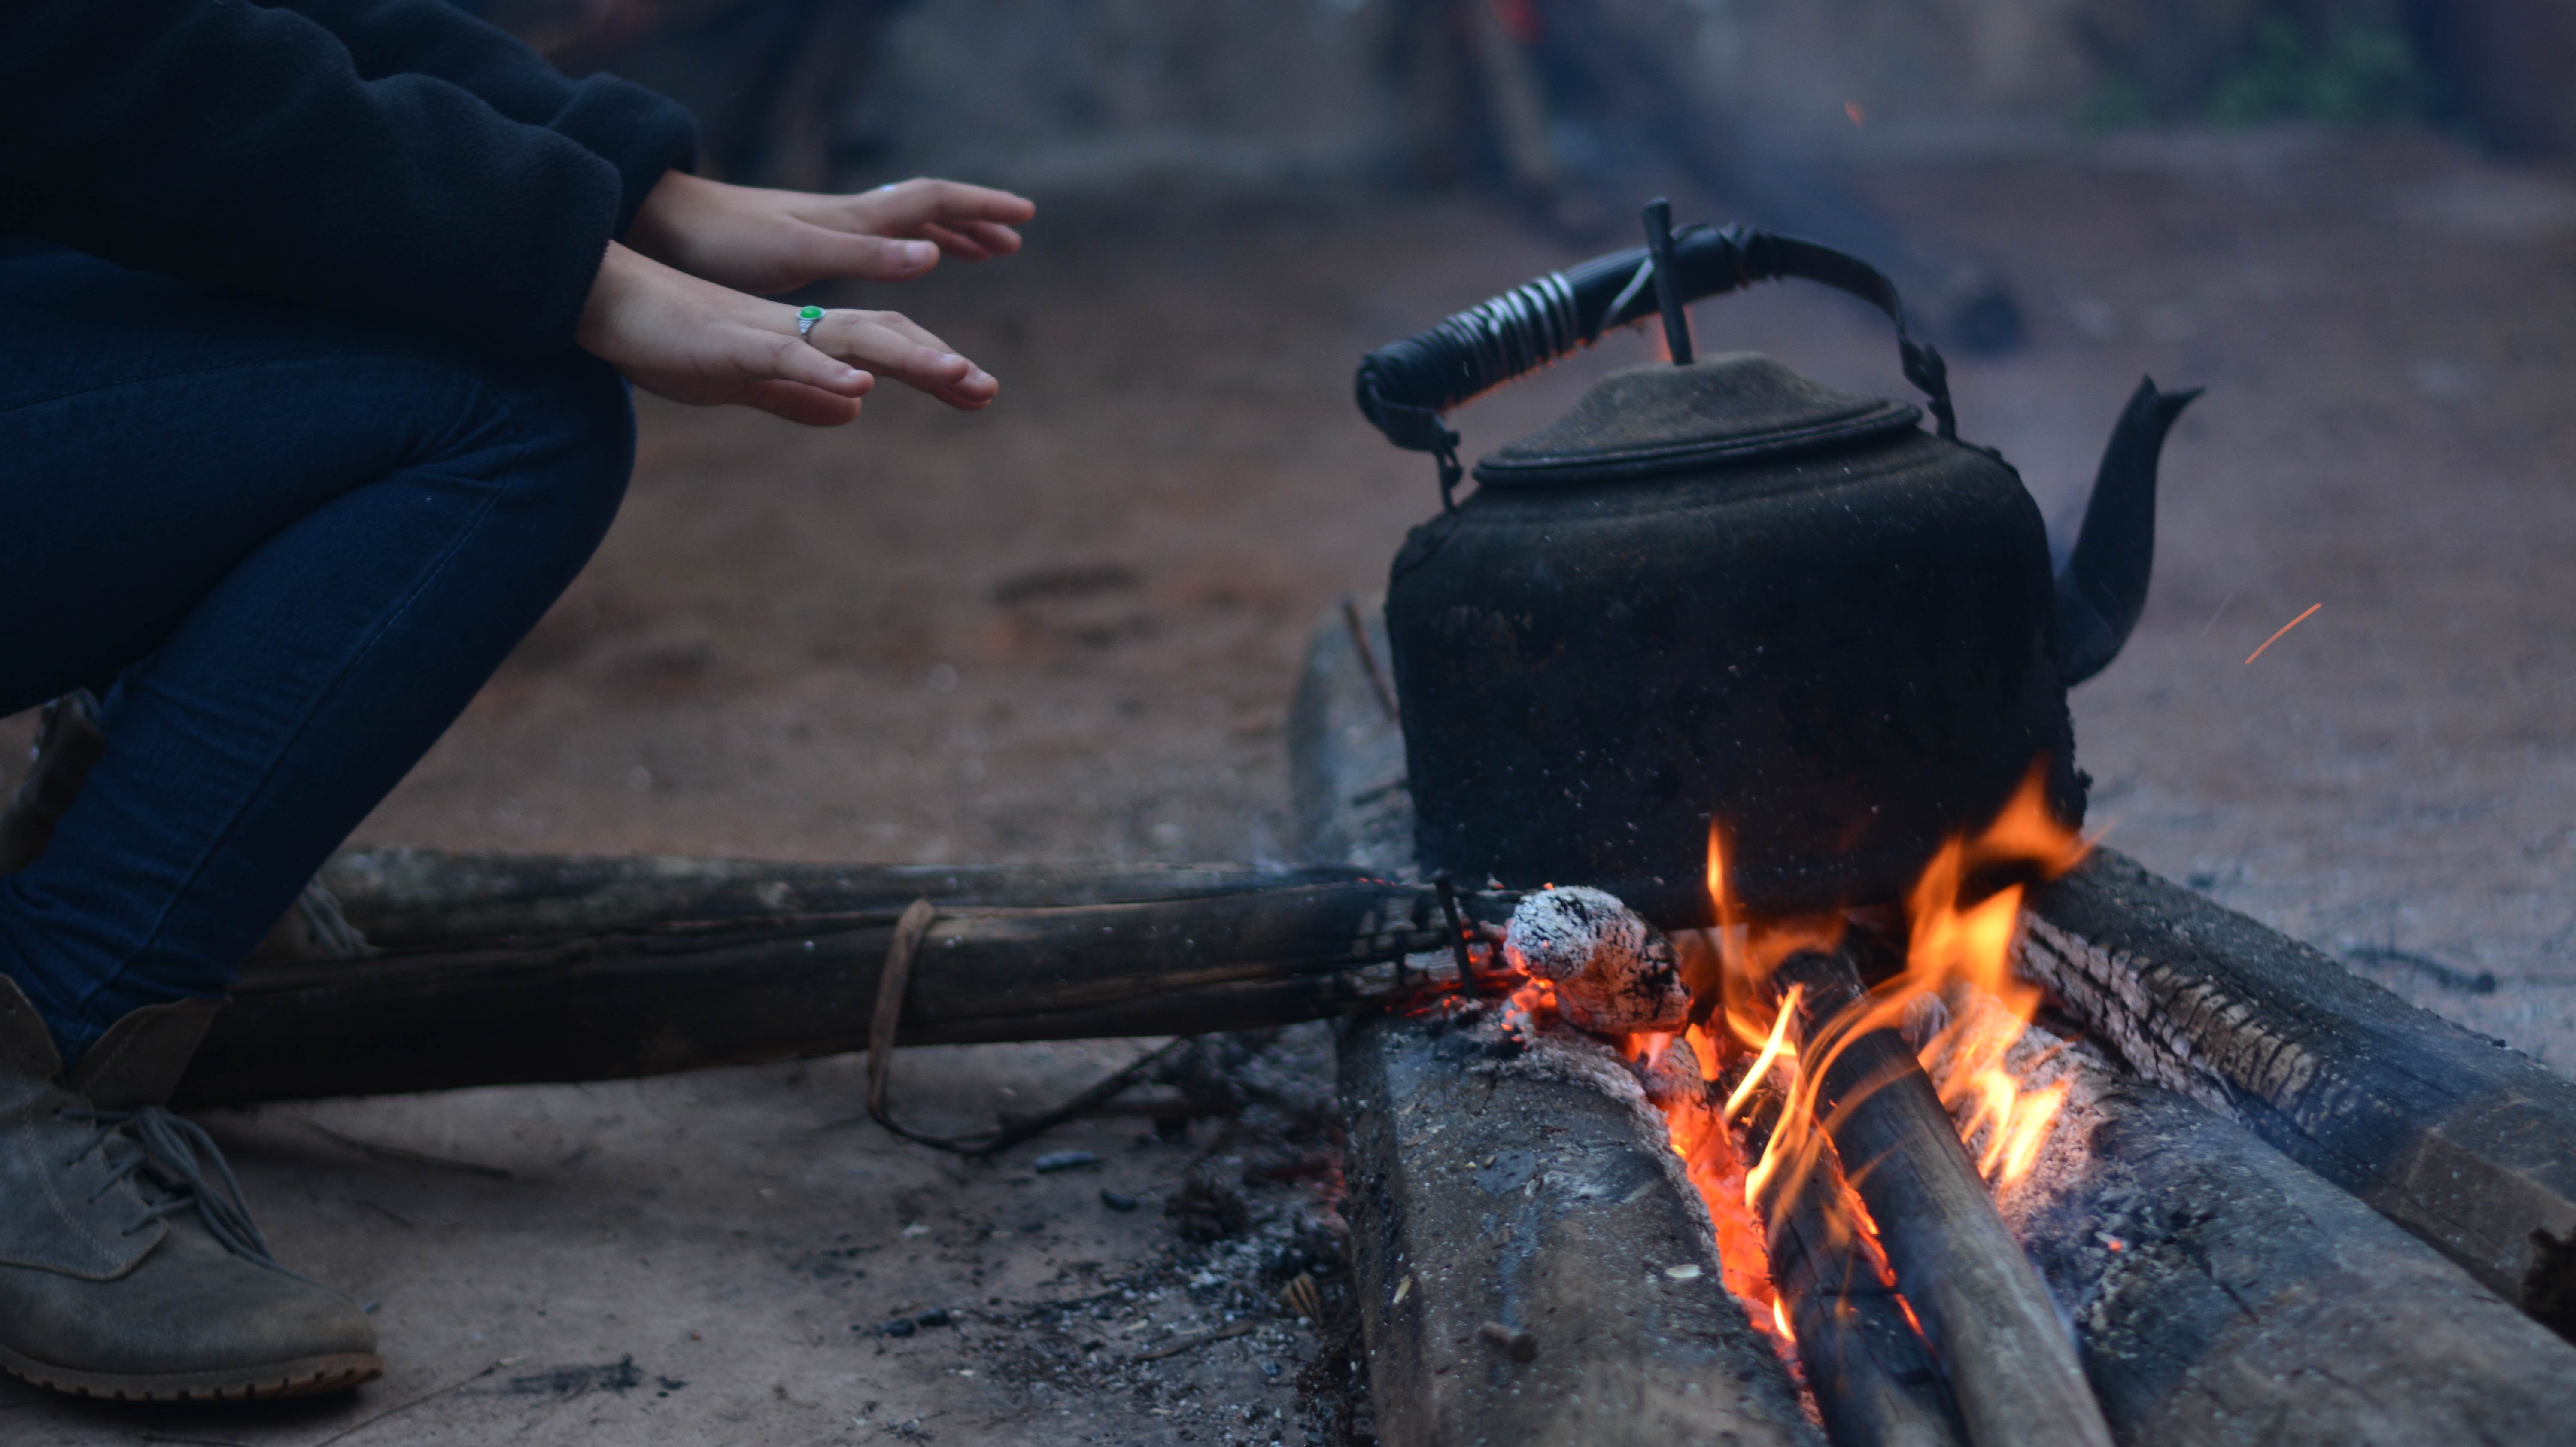 person warming their hands over a campfire with a kettle